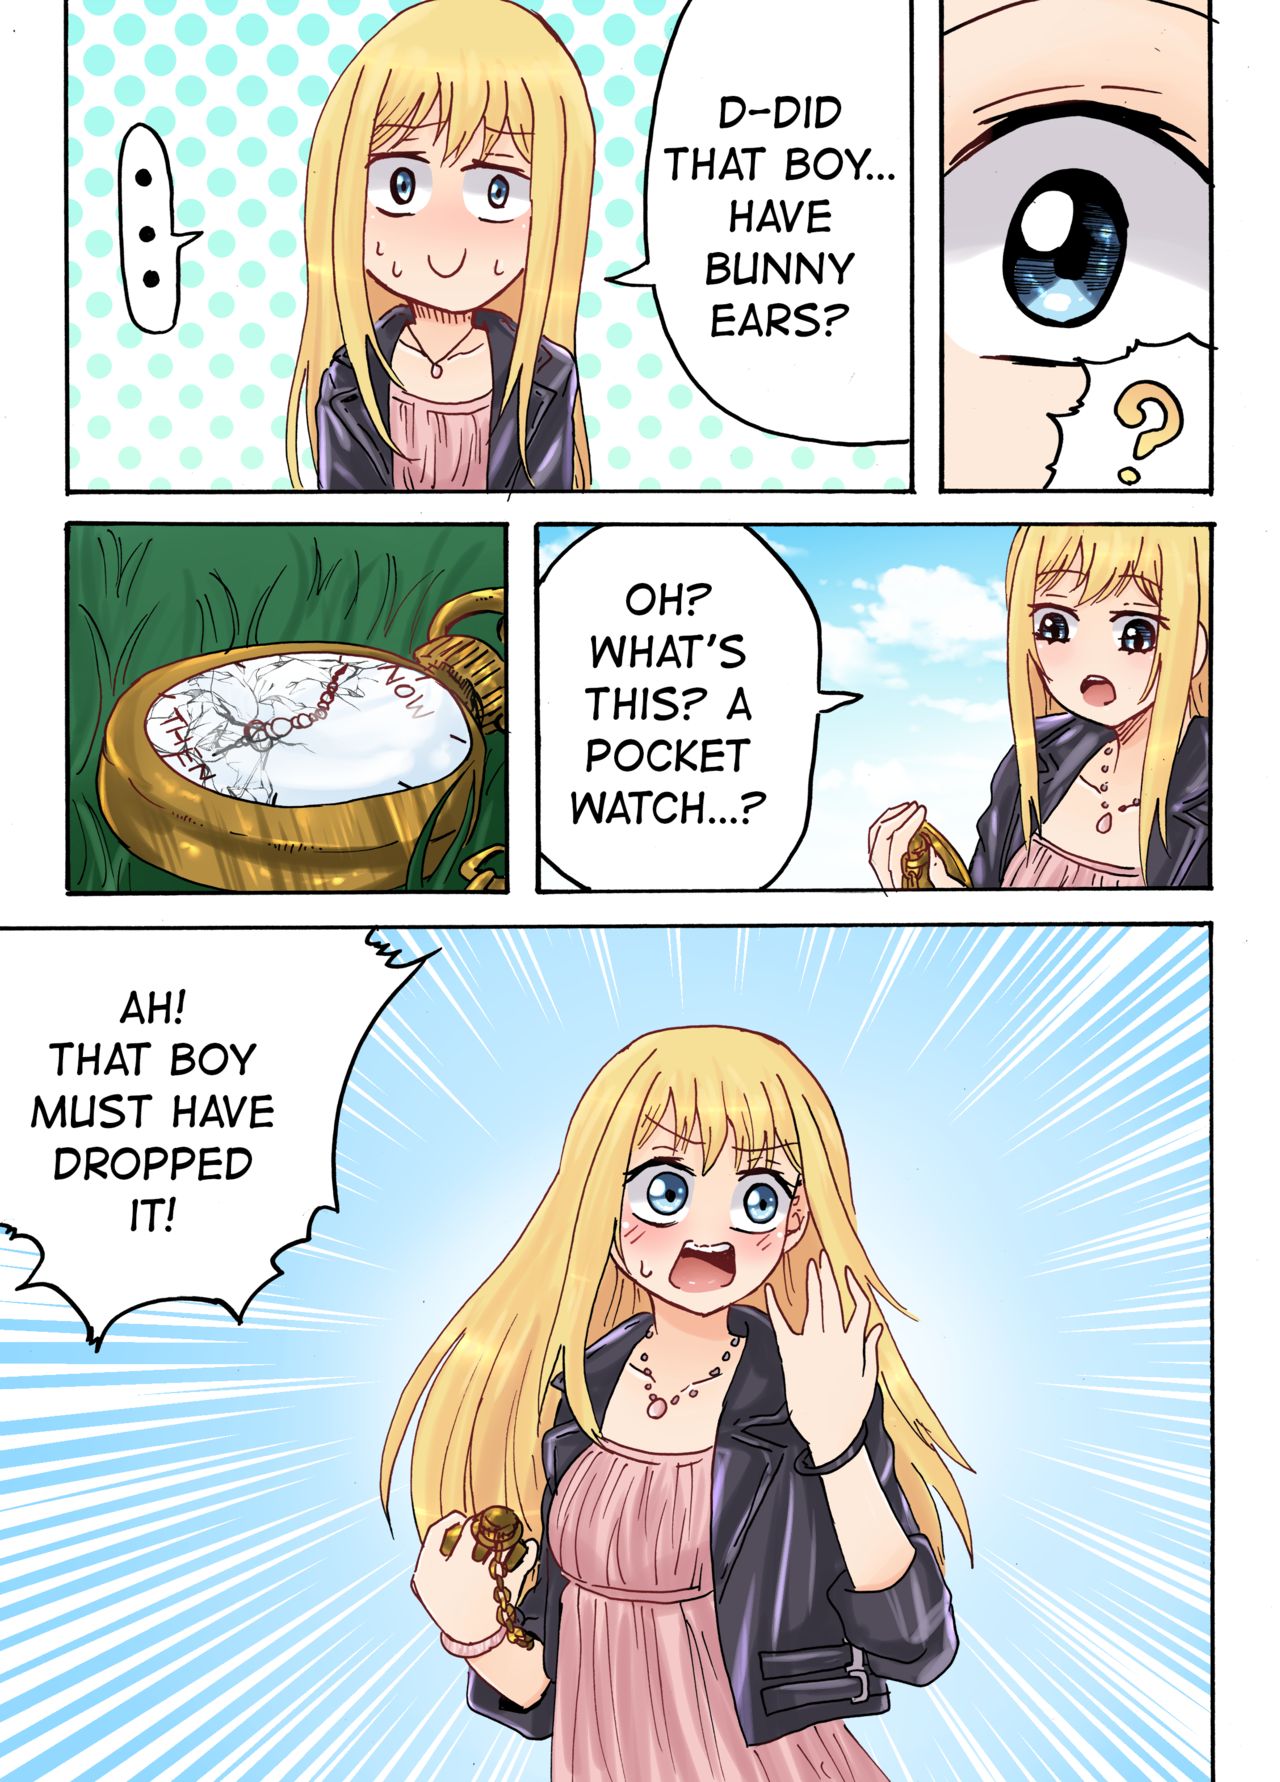 Rabbit Alice In Wonderland Porn Comic - Alice In! Episode 1 - The Rabbit Hole of Confusion - Page 10 - HentaiEra